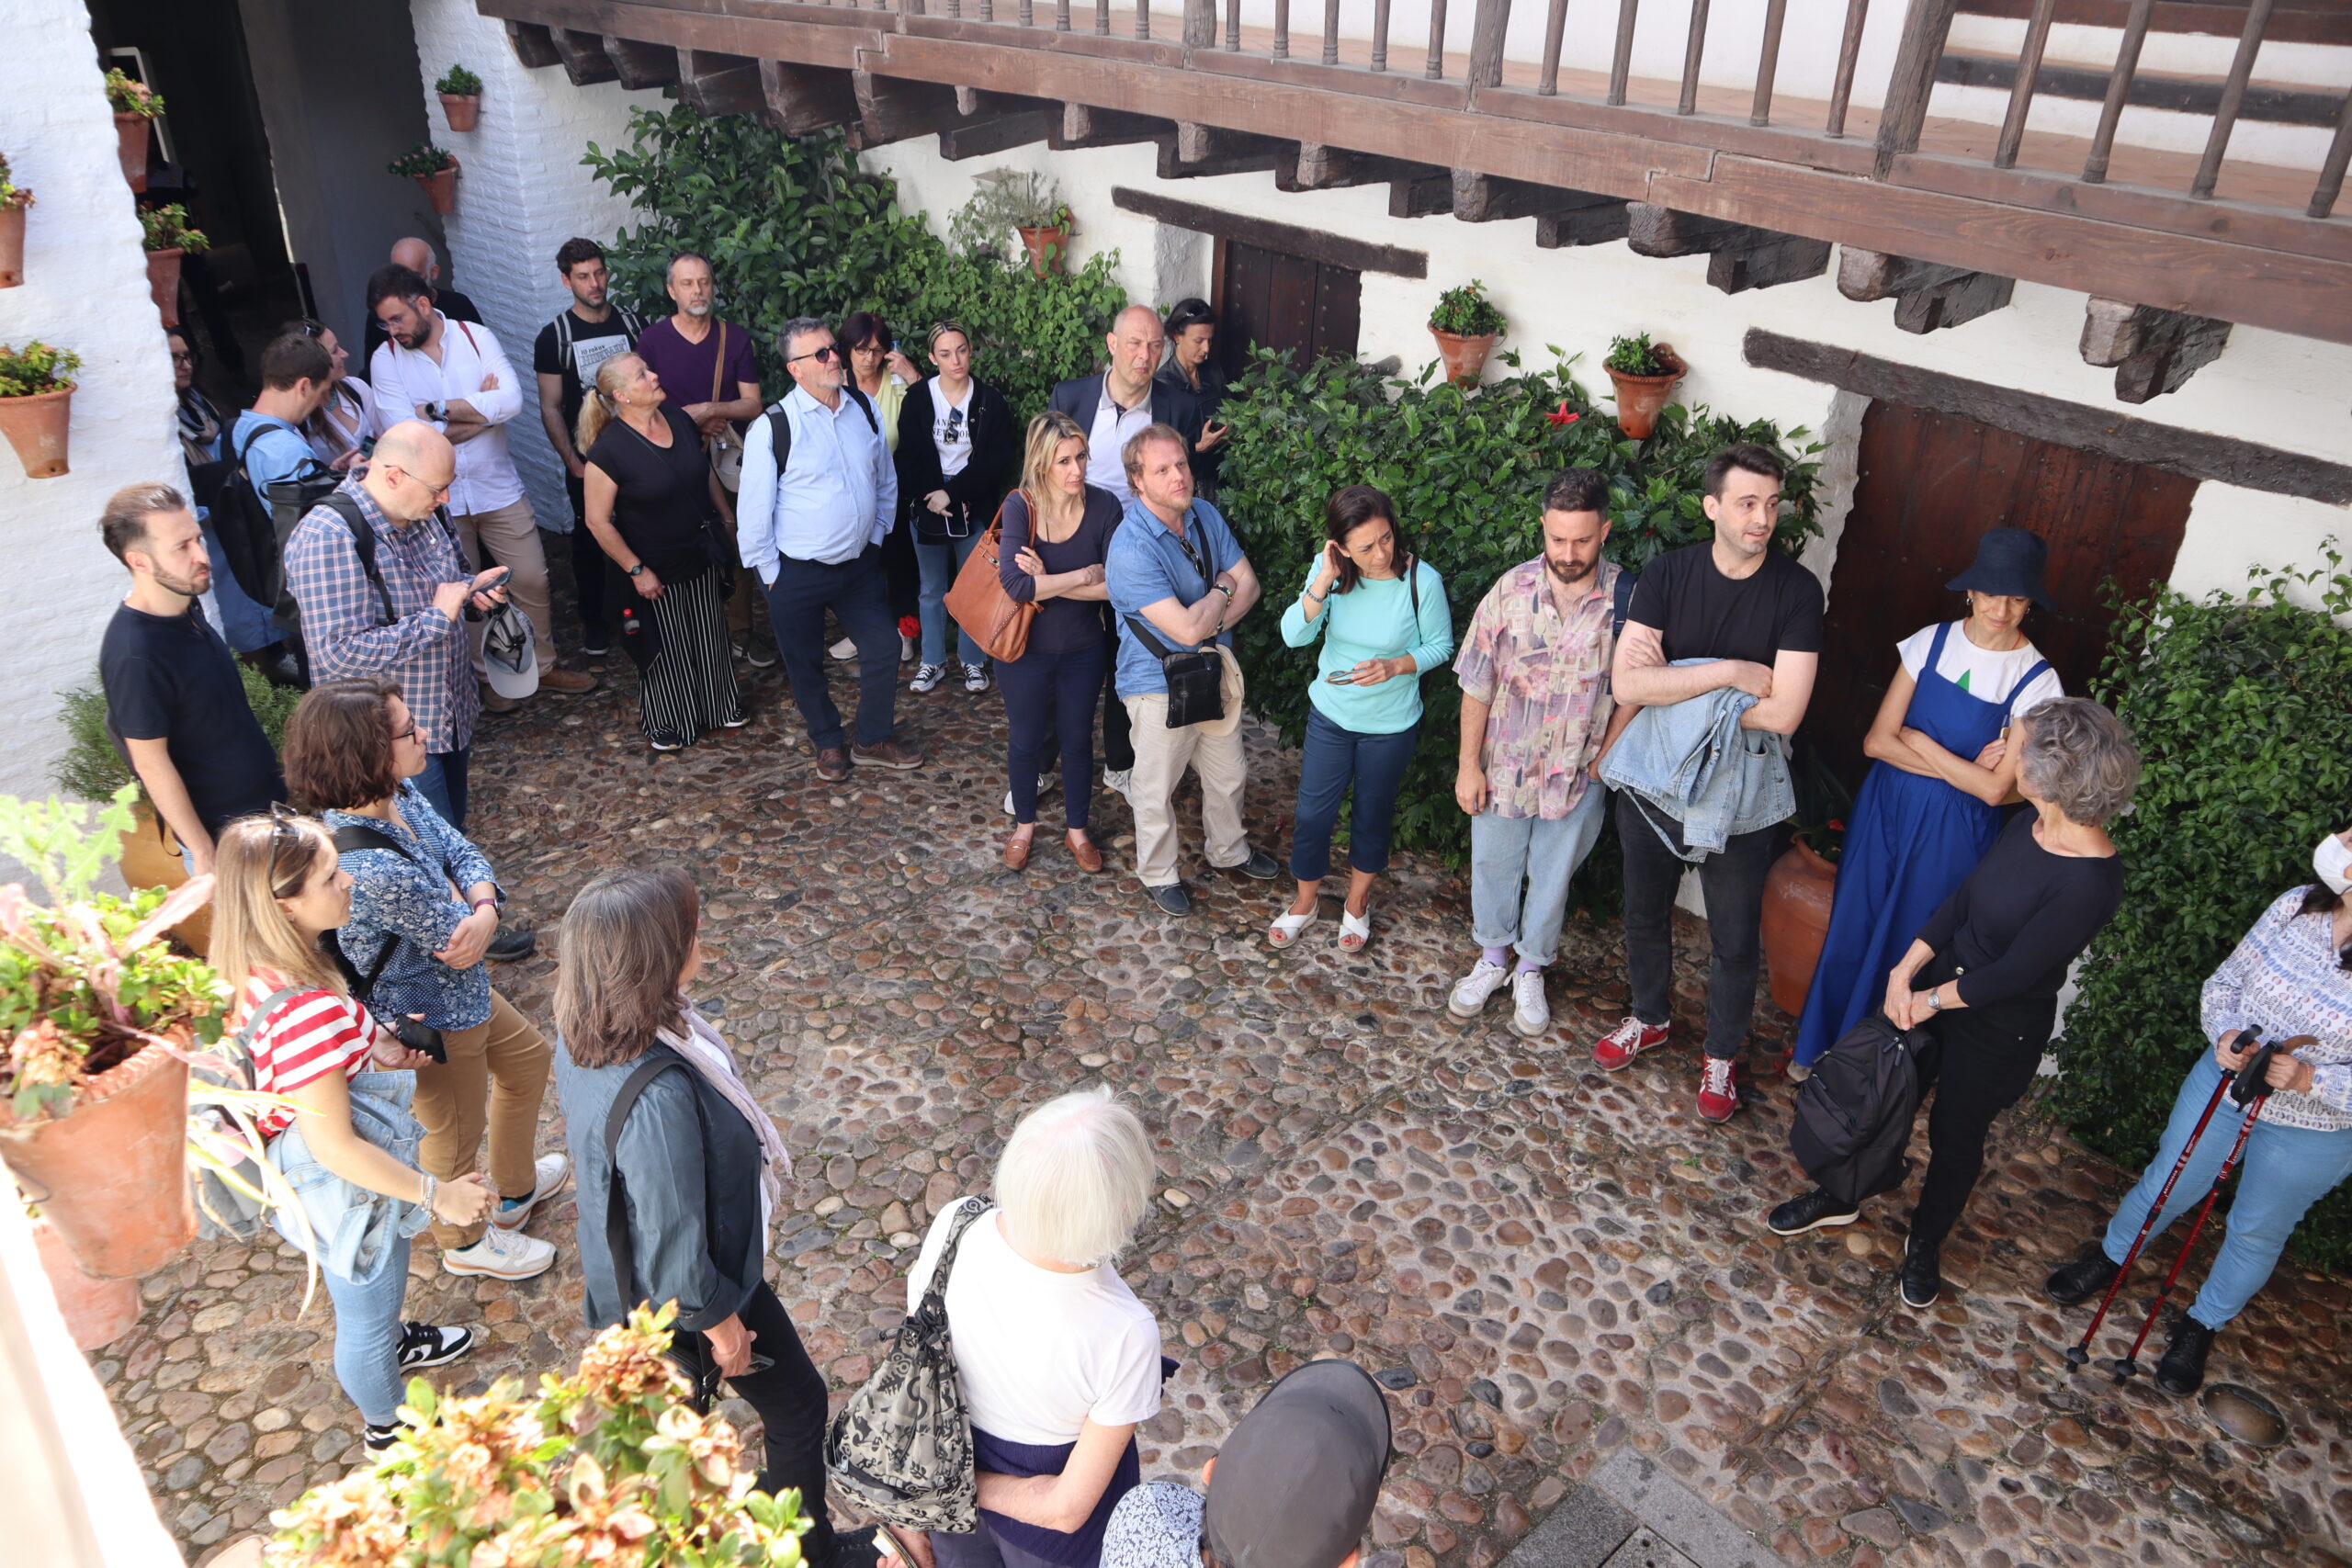 Group of people in one of Cordoba courtyards